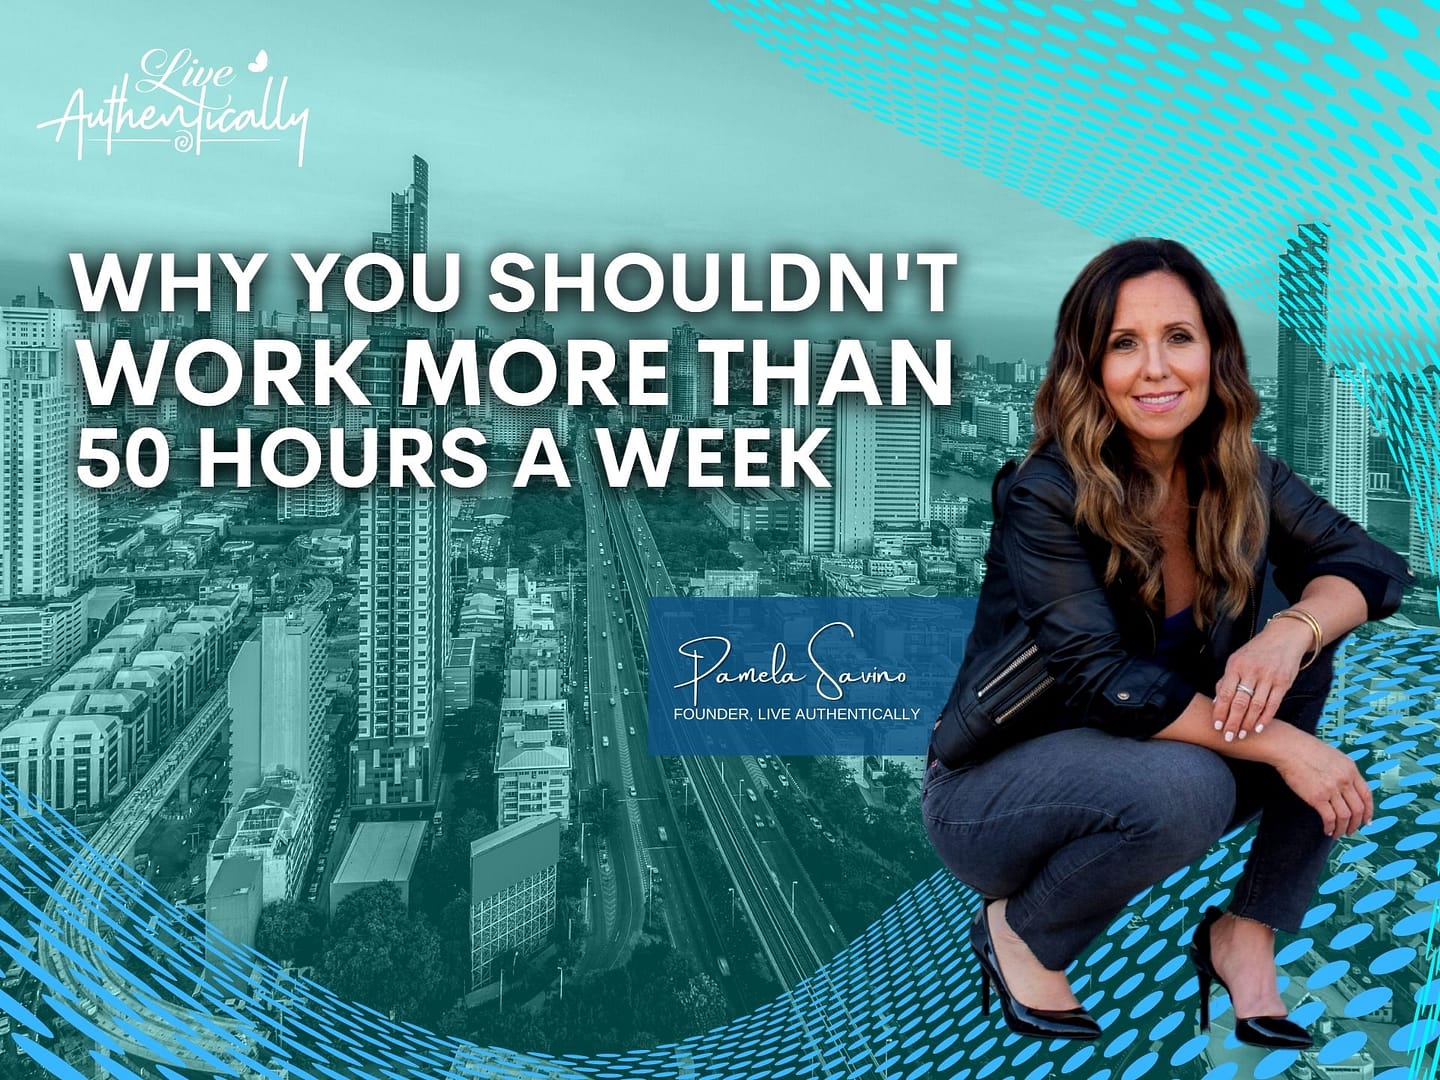 Why You Shouldn't Work More Than 50 Hours a Week